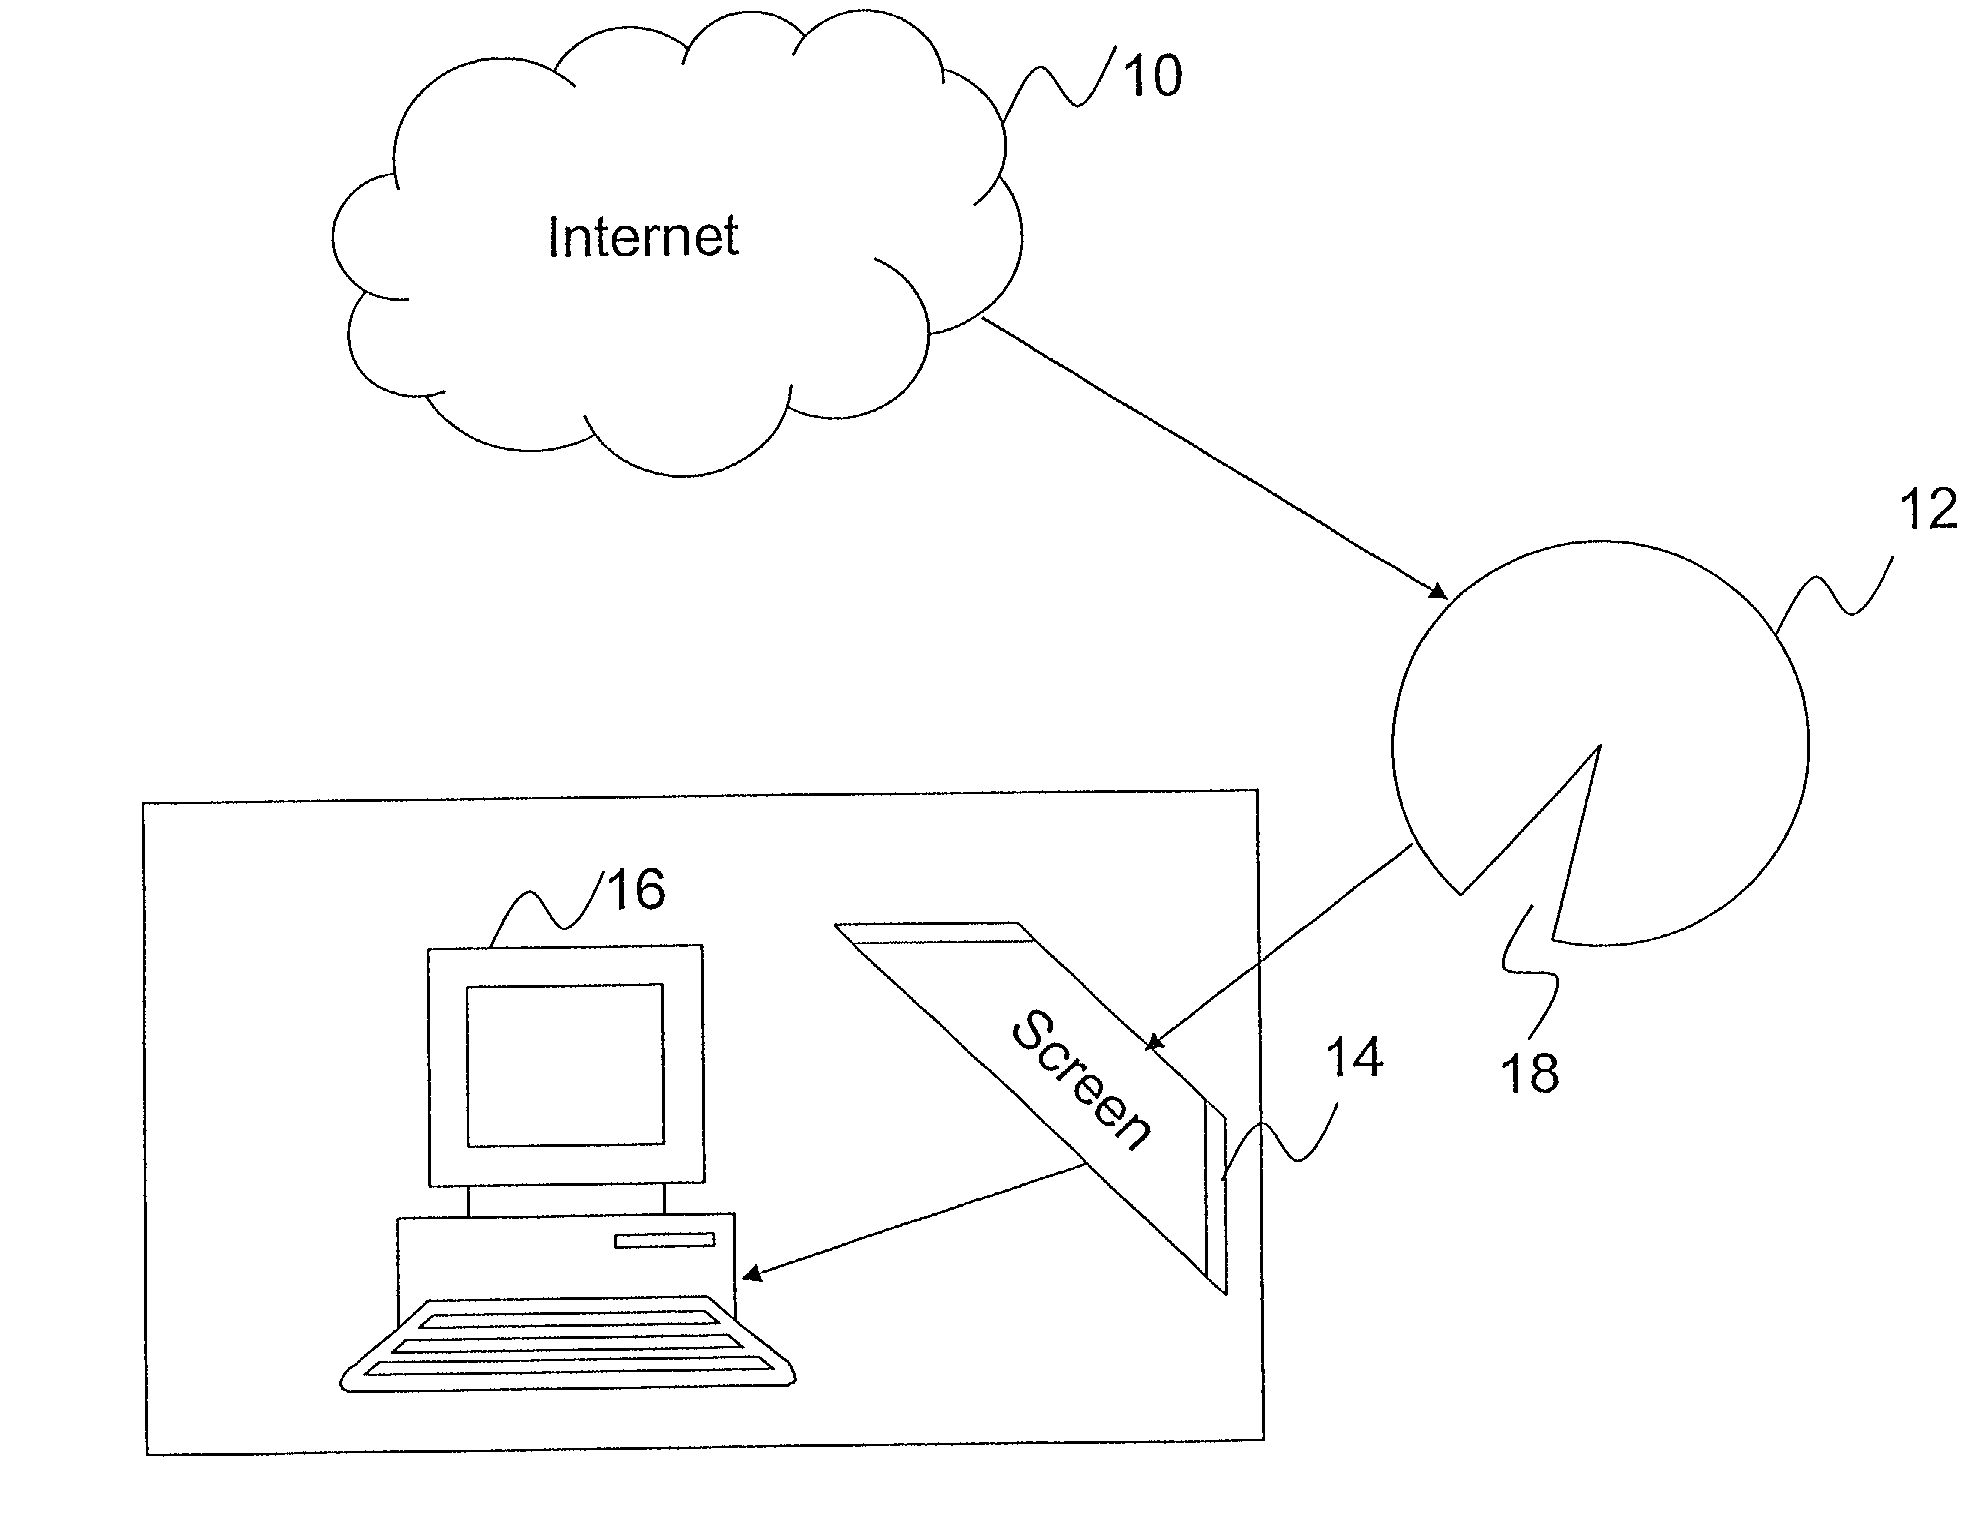 Methods of attack on a content screening algorithm based on adulteration of marked content